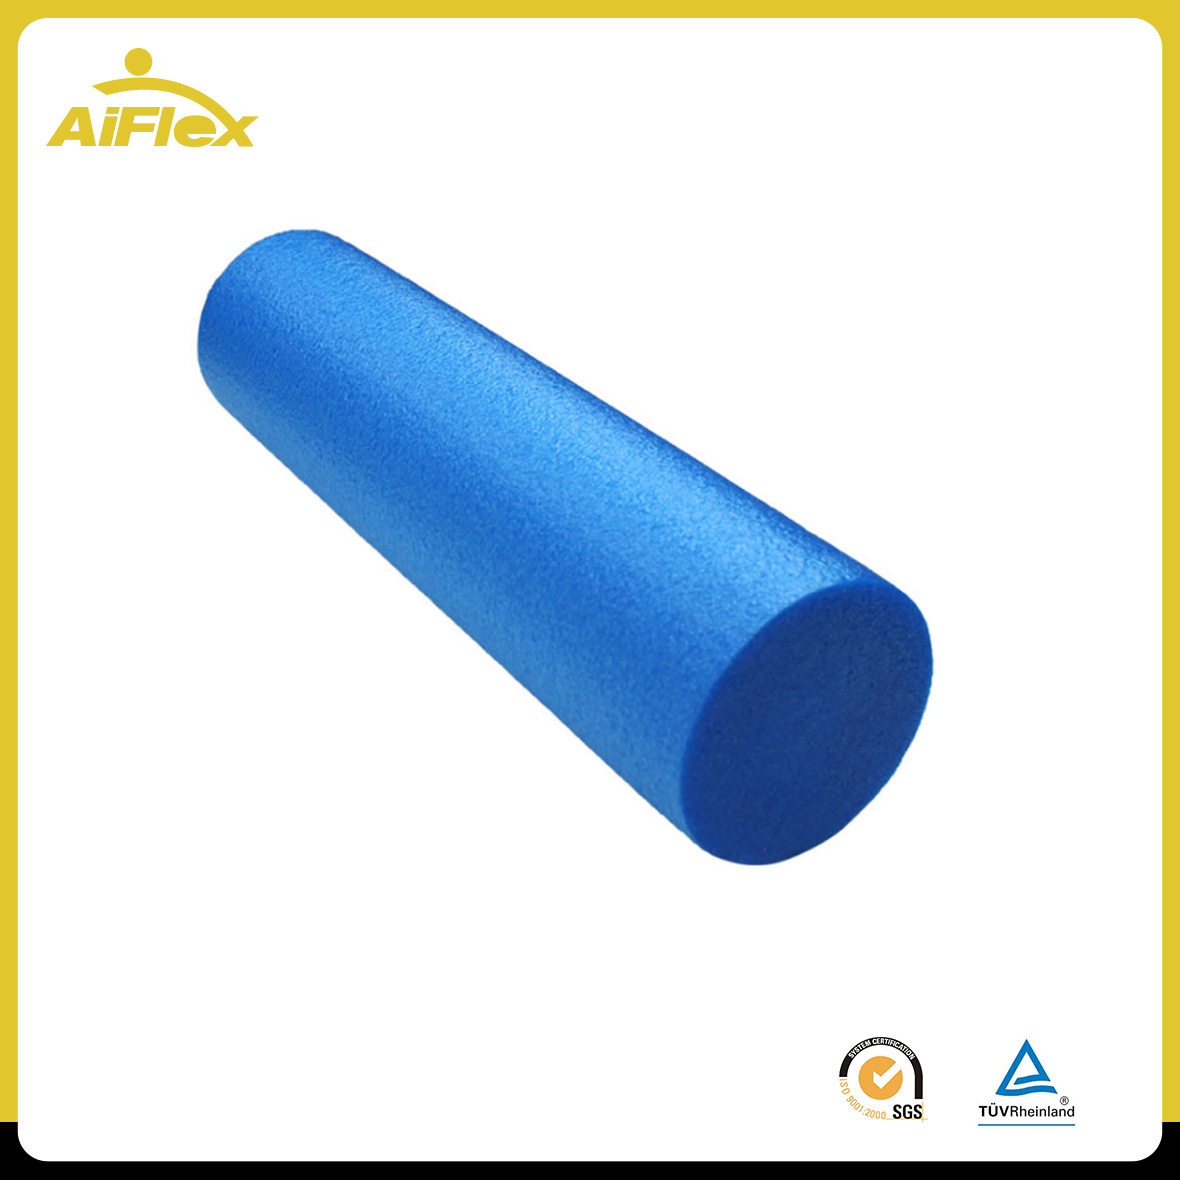 Extra Firm Foam Roller for Muscle